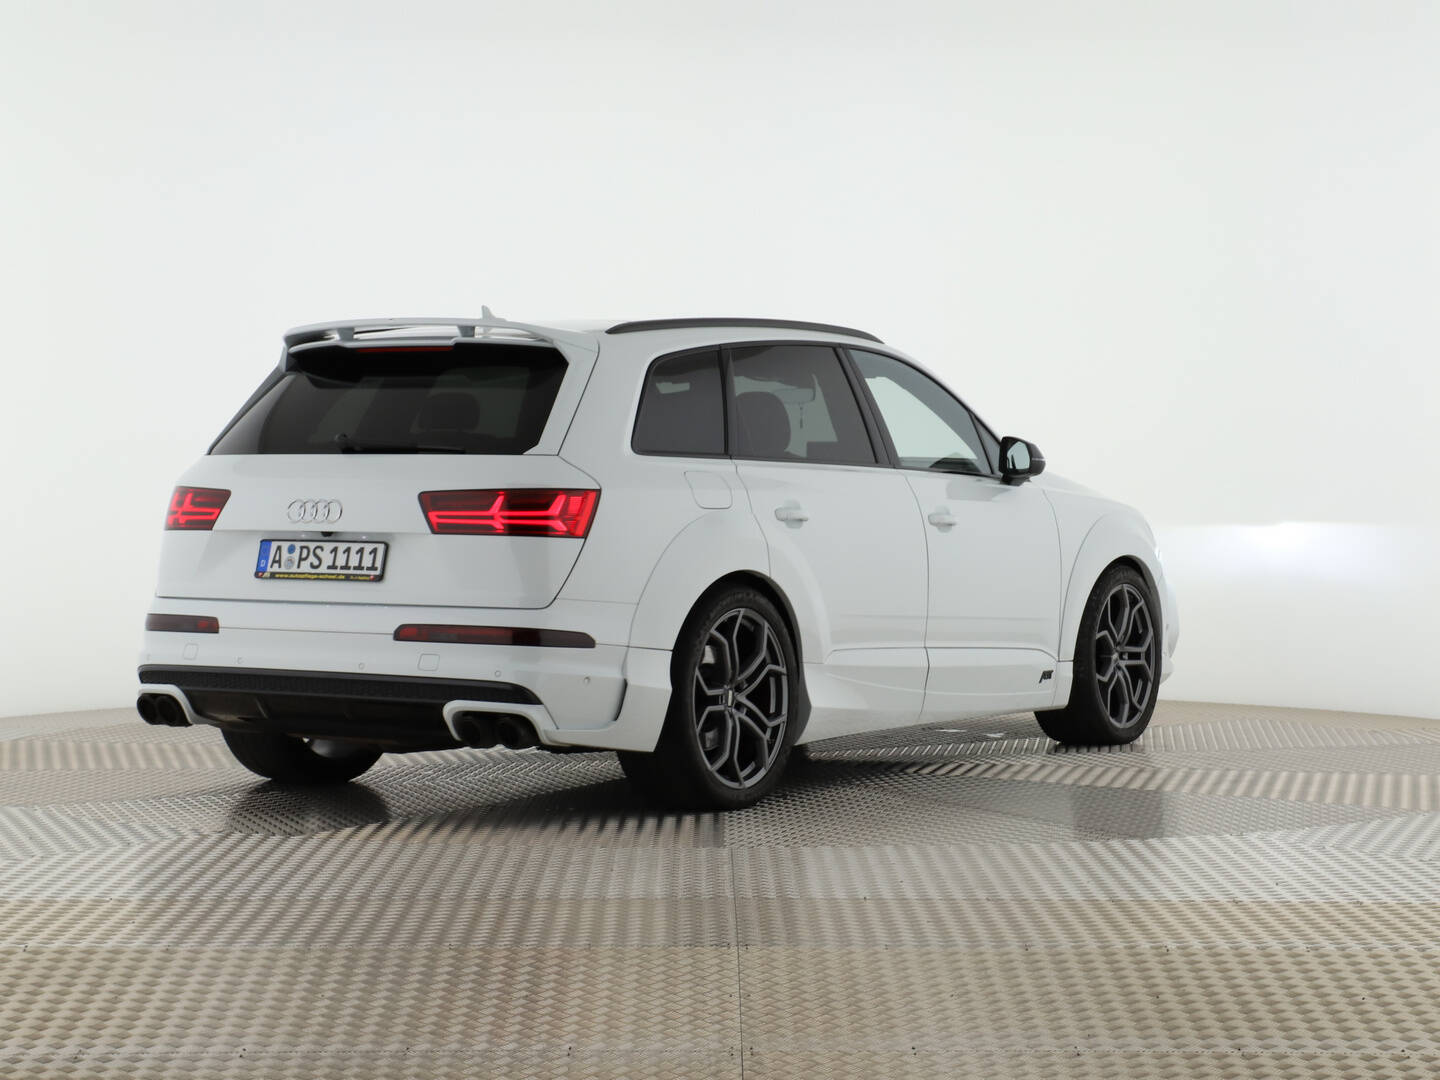 AWESOME HALFTIME - Audi Tuning, VW Tuning, Chiptuning von ABT